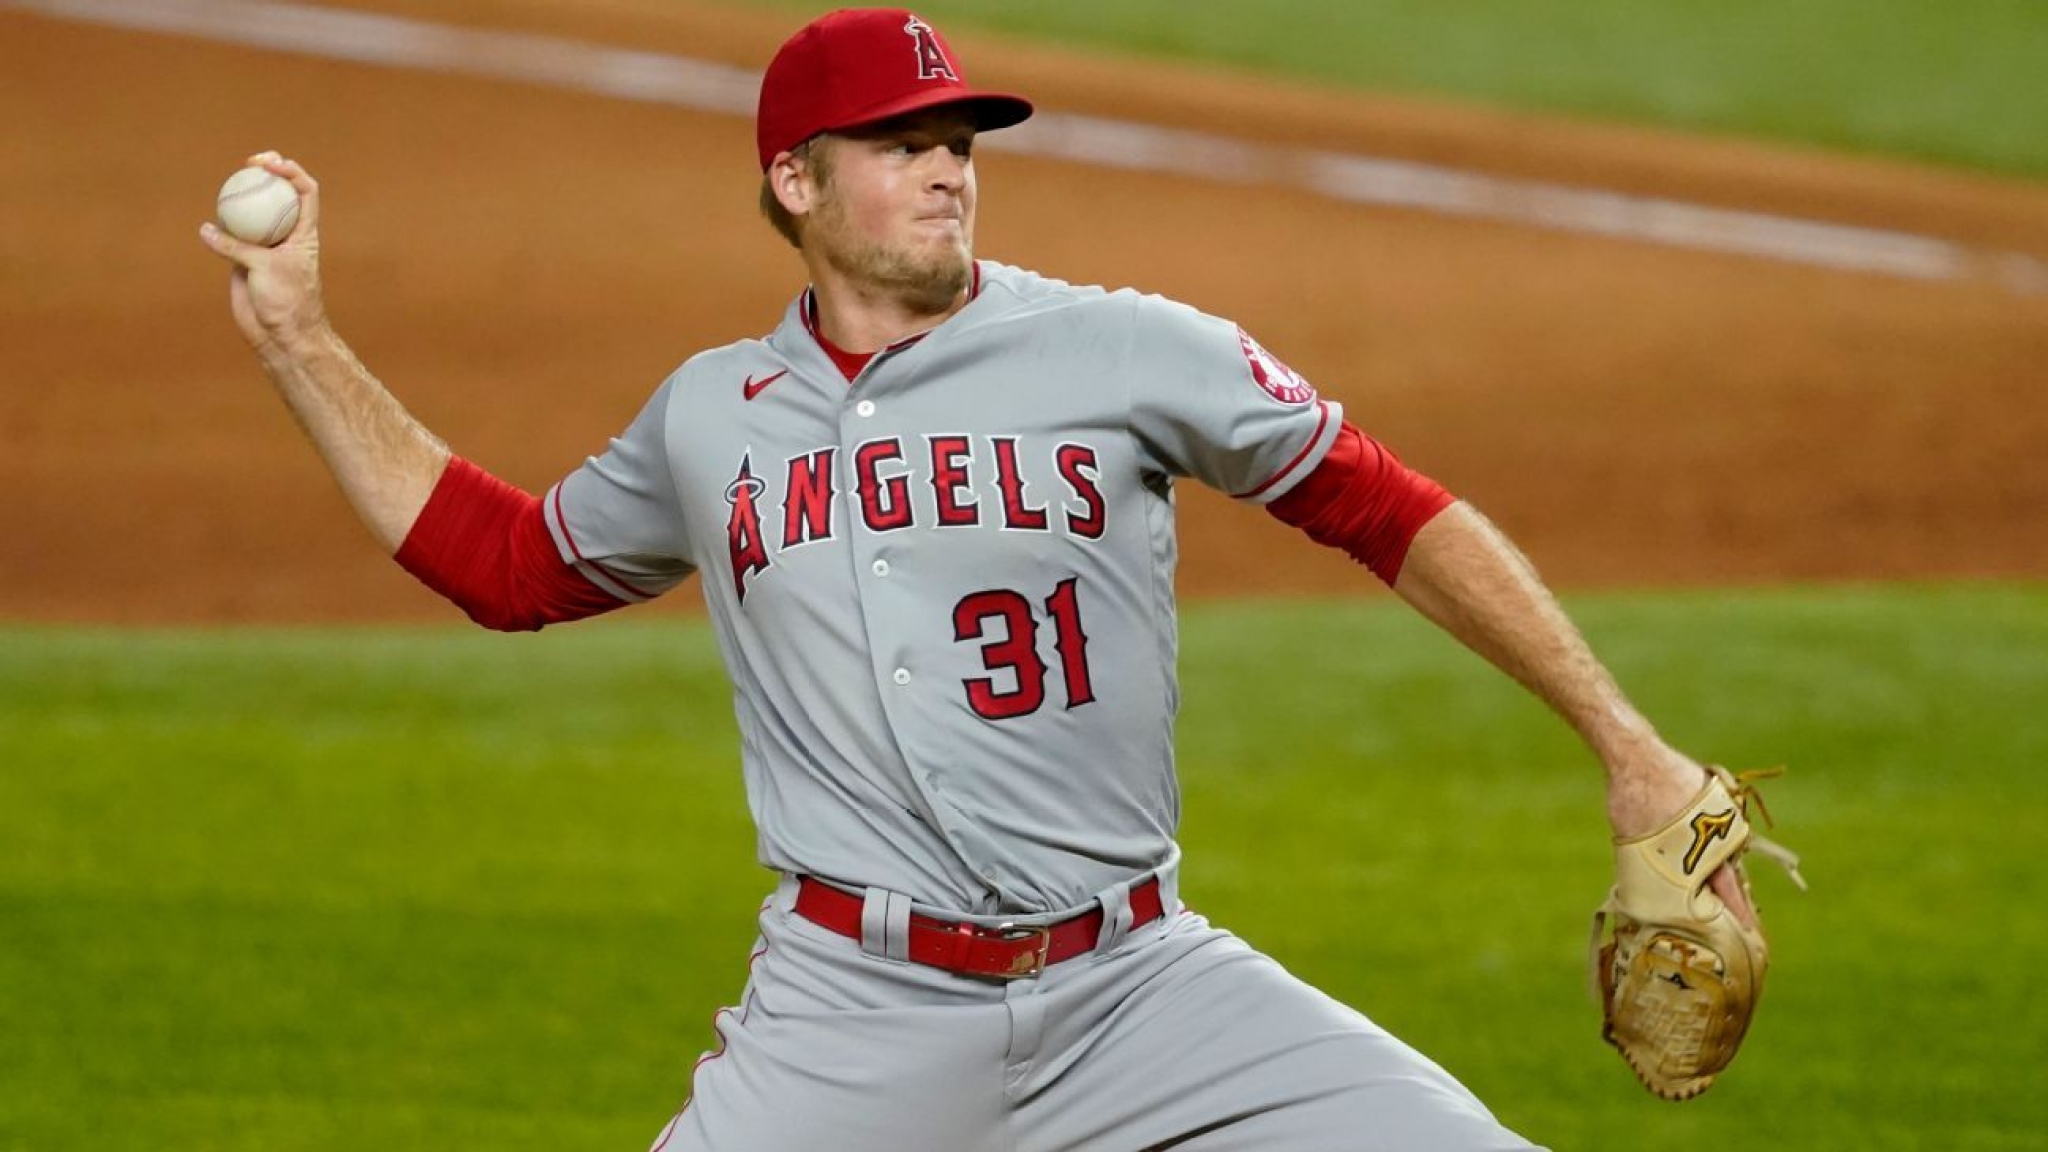 Angels’ Buttrey, 28, says he’s leaving baseball